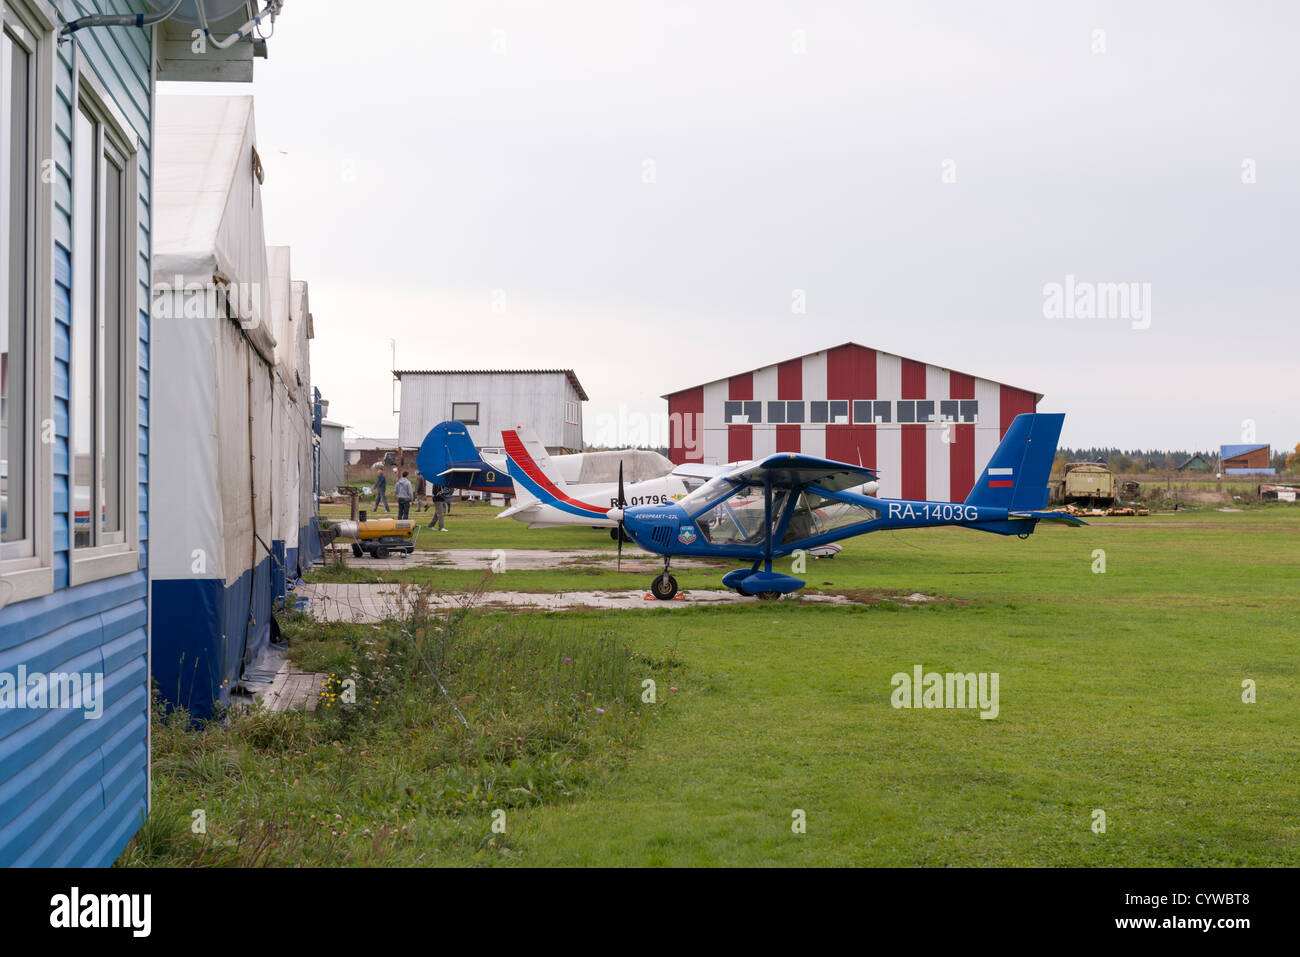 small private aircraft propeller plane airfield airport Stock Photo